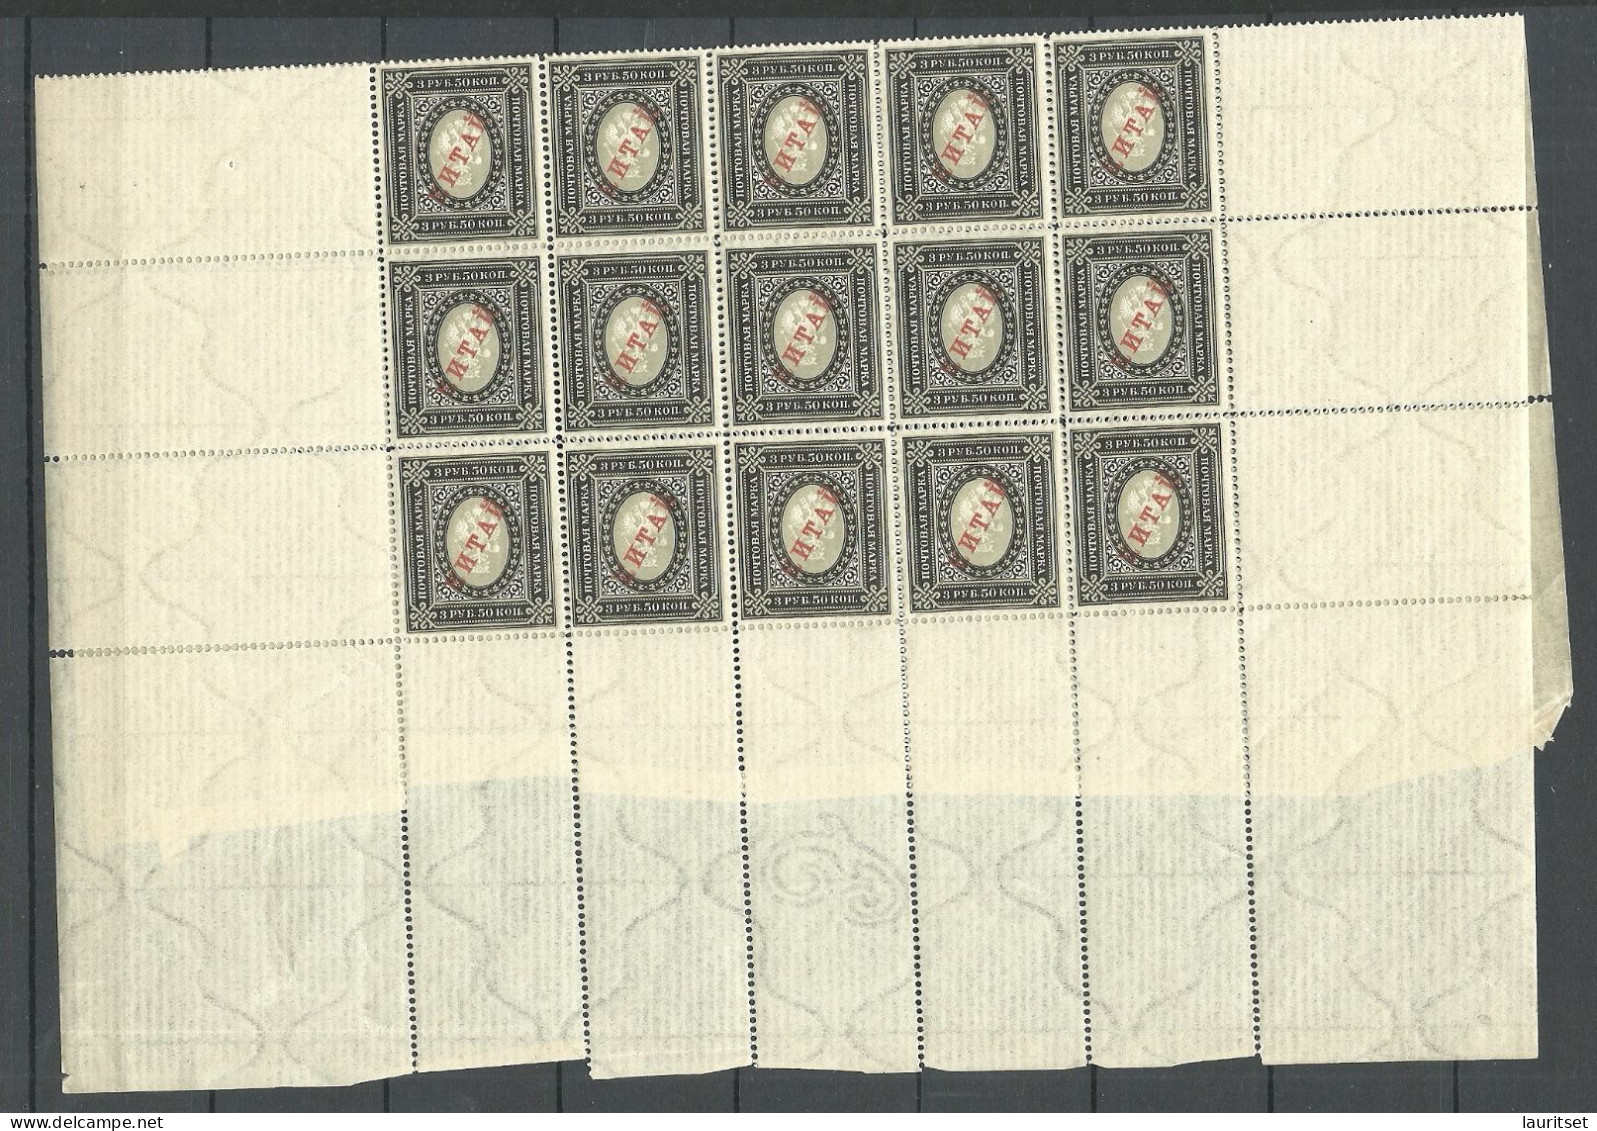 RUSSLAND RUSSIA China 1907 Michel 16 Y Complete Sheet Of 25 MNH - China